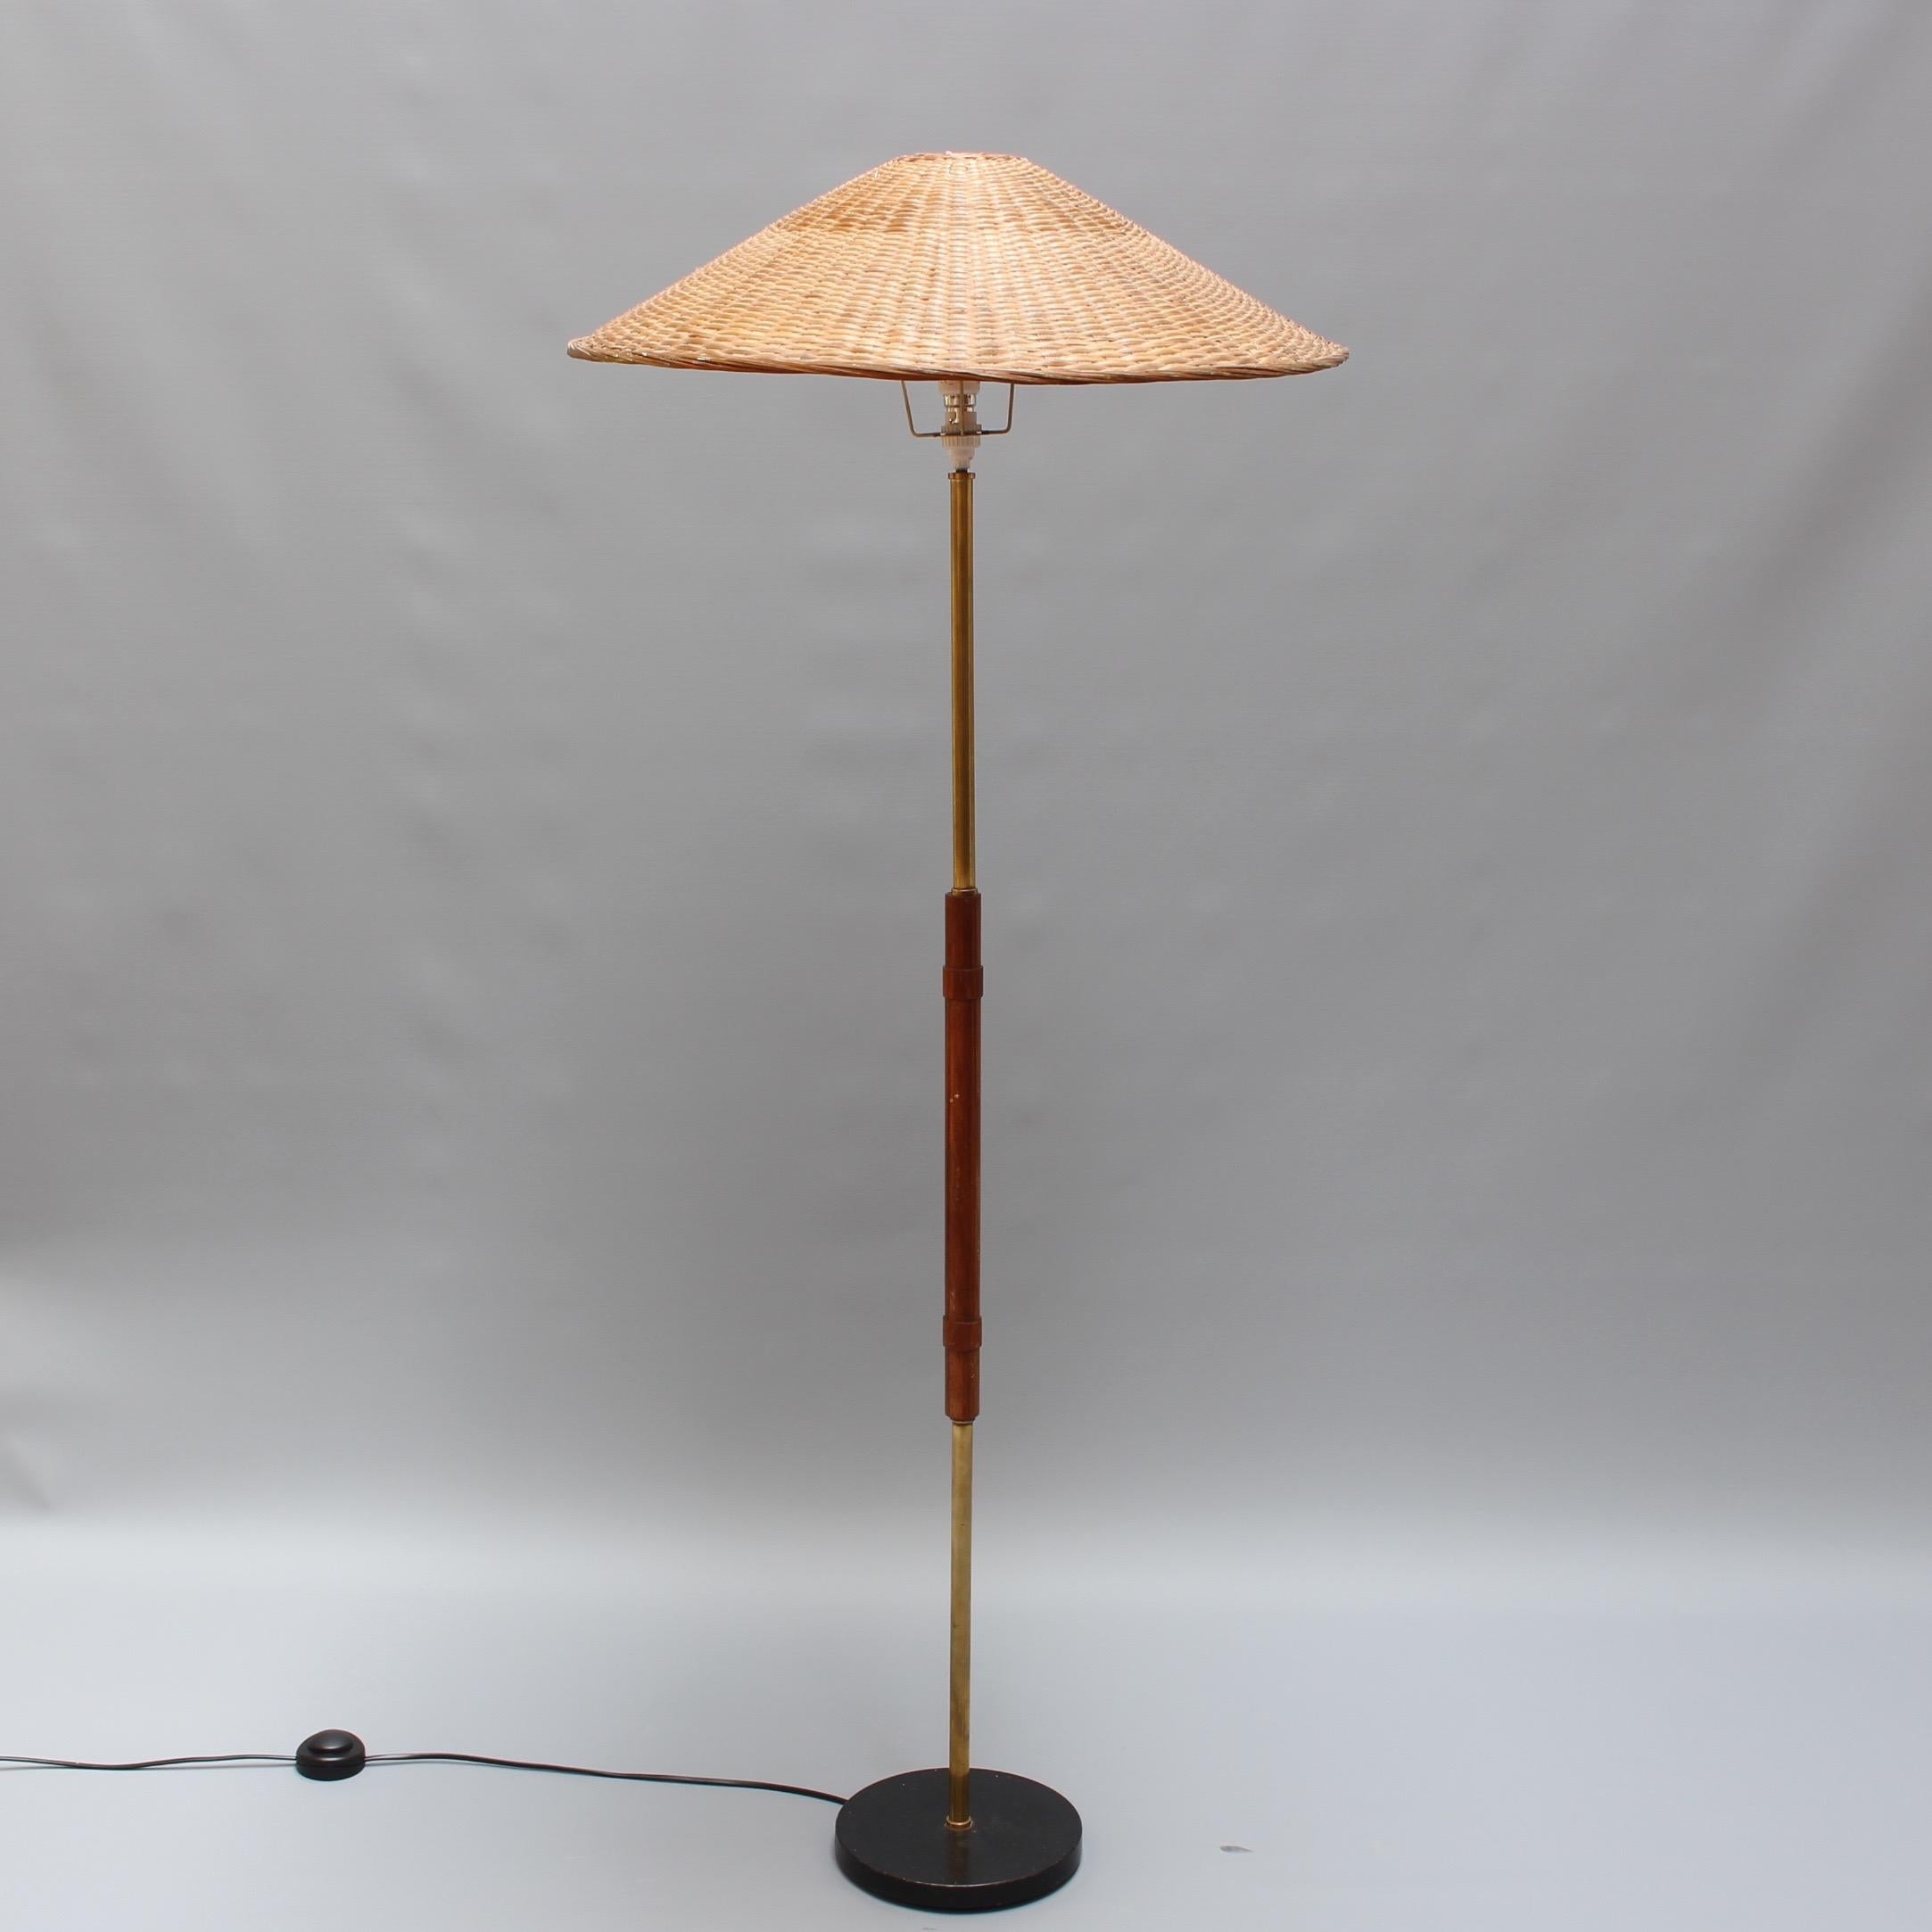 A stylish vintage Italian wood and metal floor lamp, circa 1960s. This lamp somehow reminds one of the warmth of the Italian coast in summer whilst watching the sunset from the terrace and sipping Campari-orange on the rocks. The mid-section is